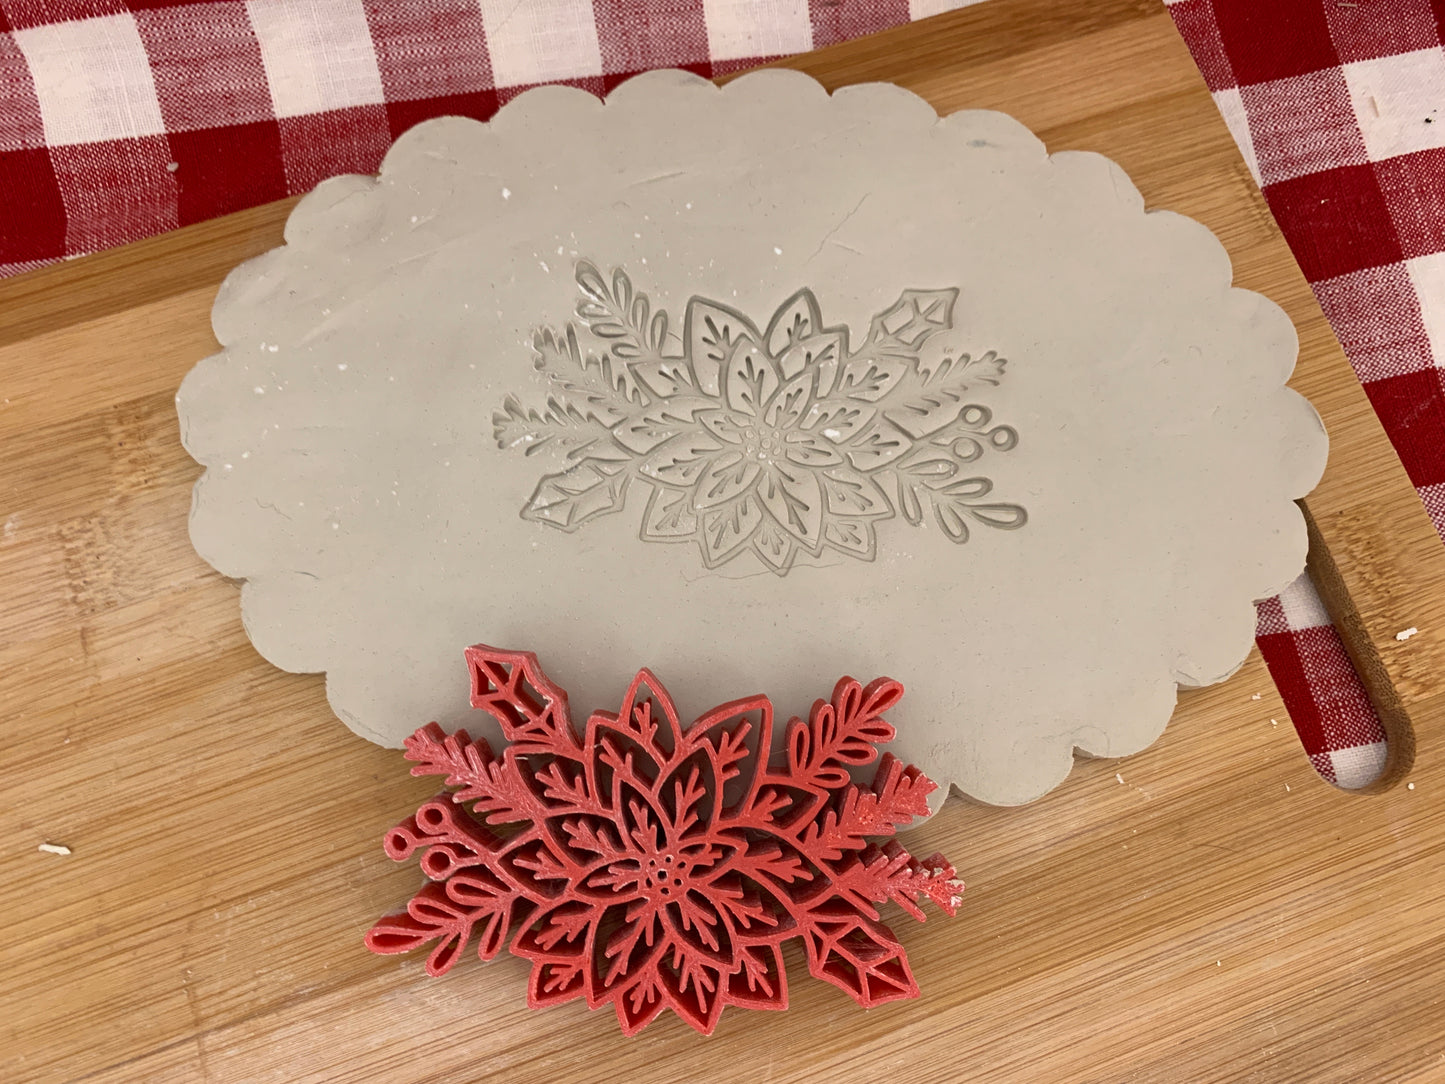 Pottery Stamp, Poinsettia with branches design - multiple sizes